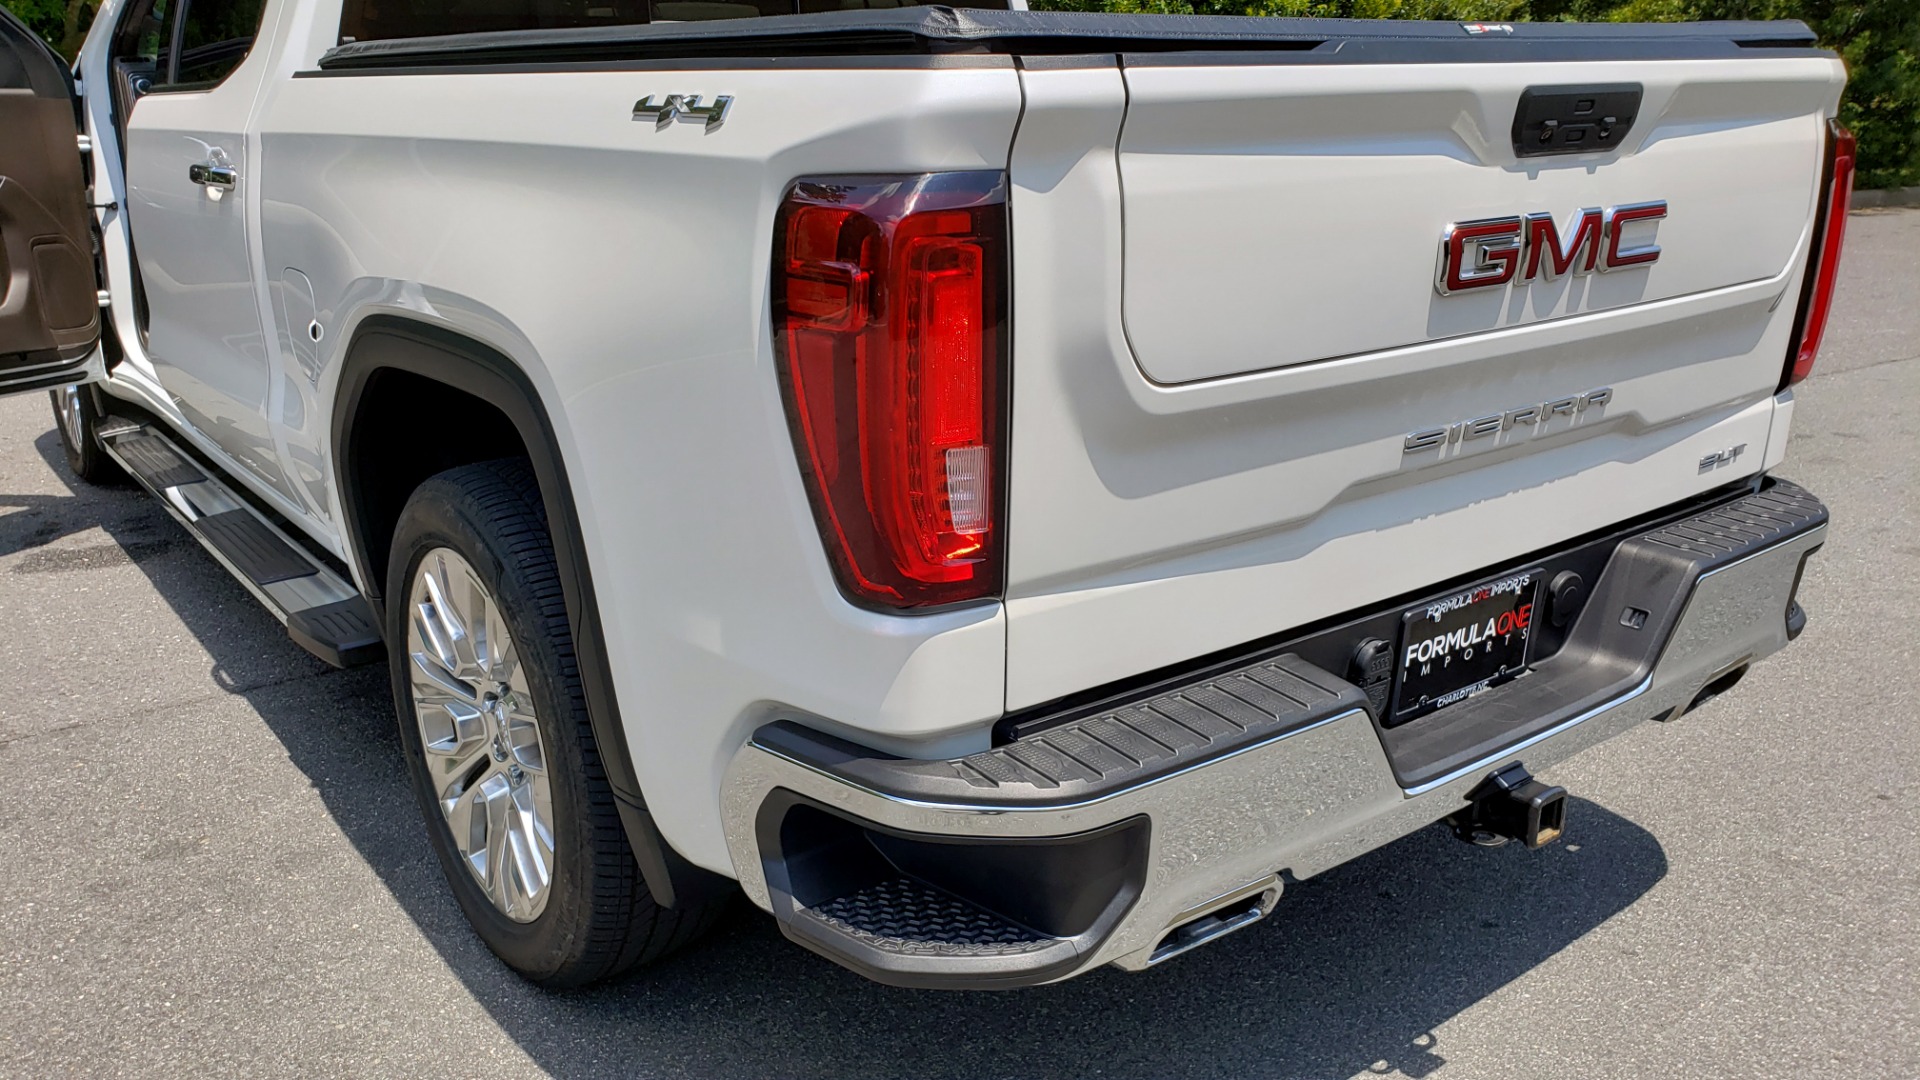 Used 2019 GMC SIERRA 1500 SLT 4WD CREWCAB / PREMIUM / 6.2L V8 / NAV / SUNROOF / VENT SEATS for sale Sold at Formula Imports in Charlotte NC 28227 32